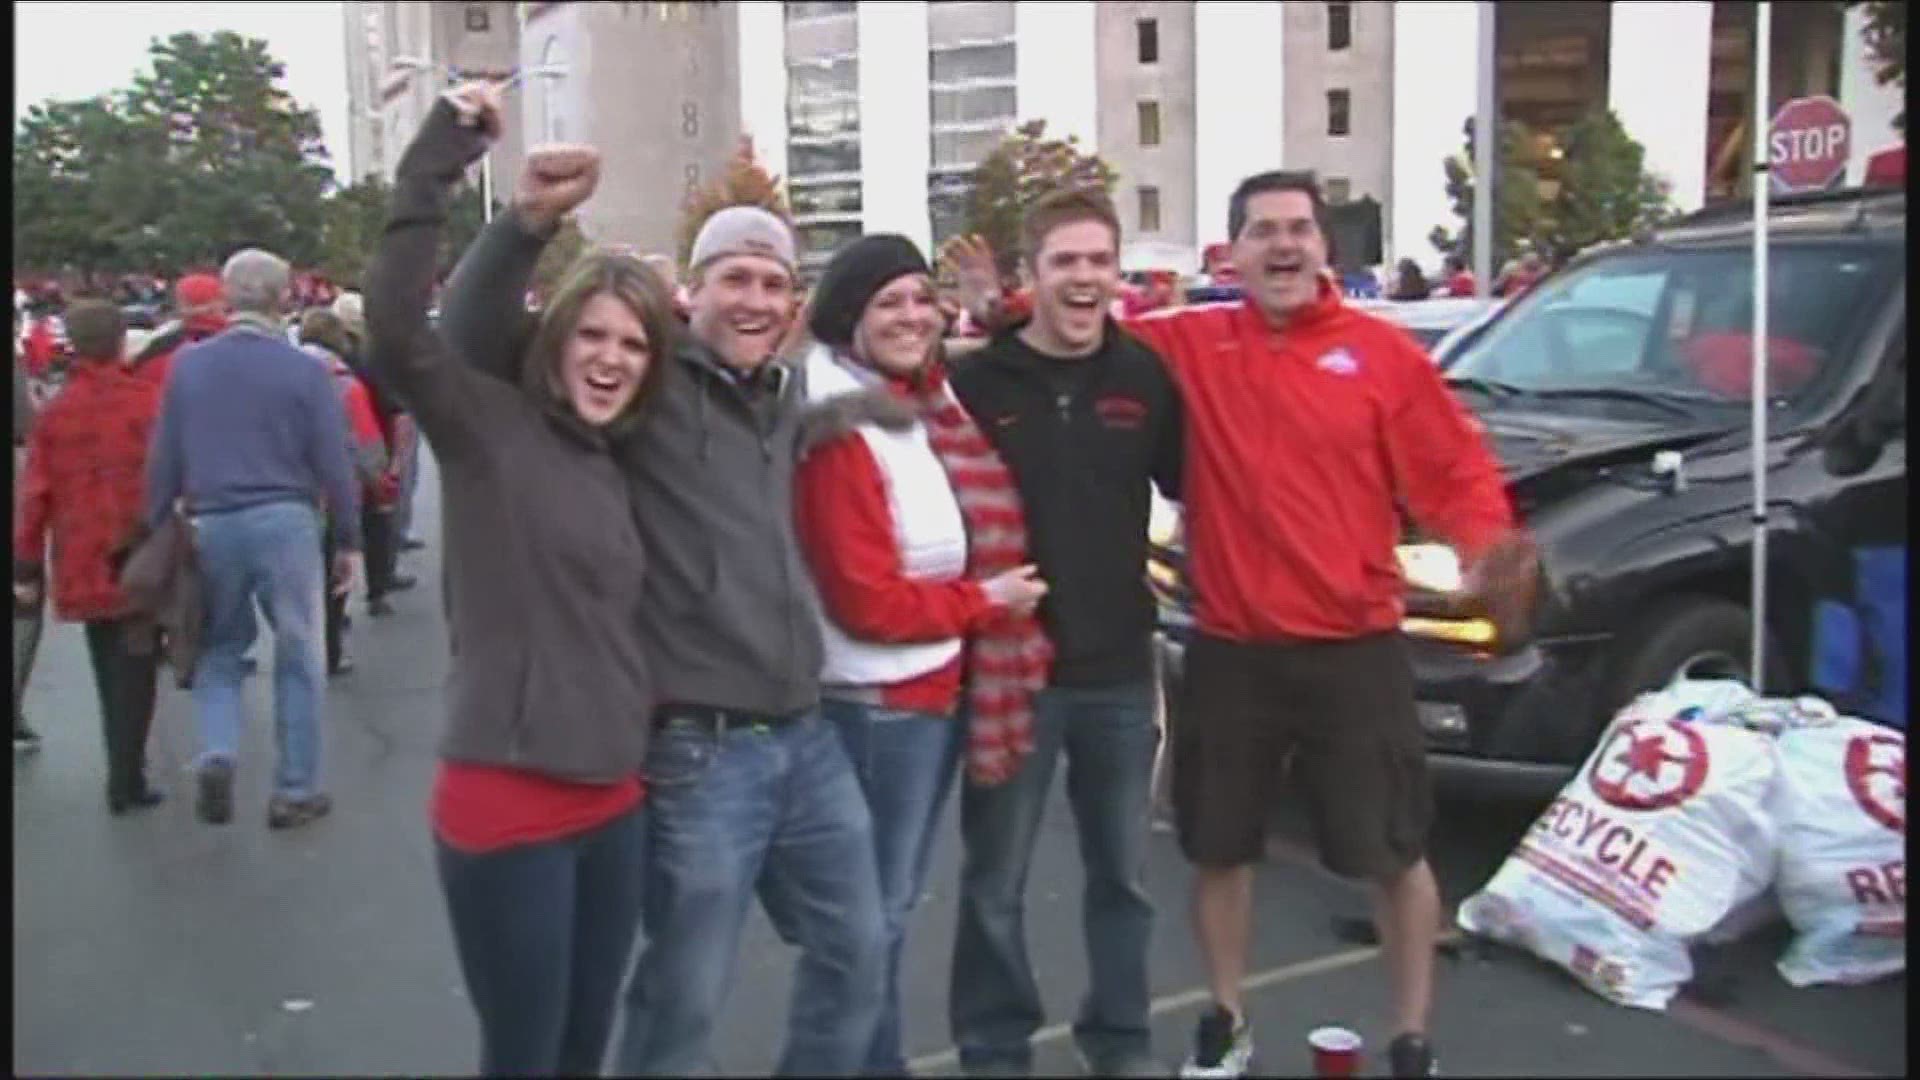 There are still questions about how fans can gather and safely enjoy Buckeye football